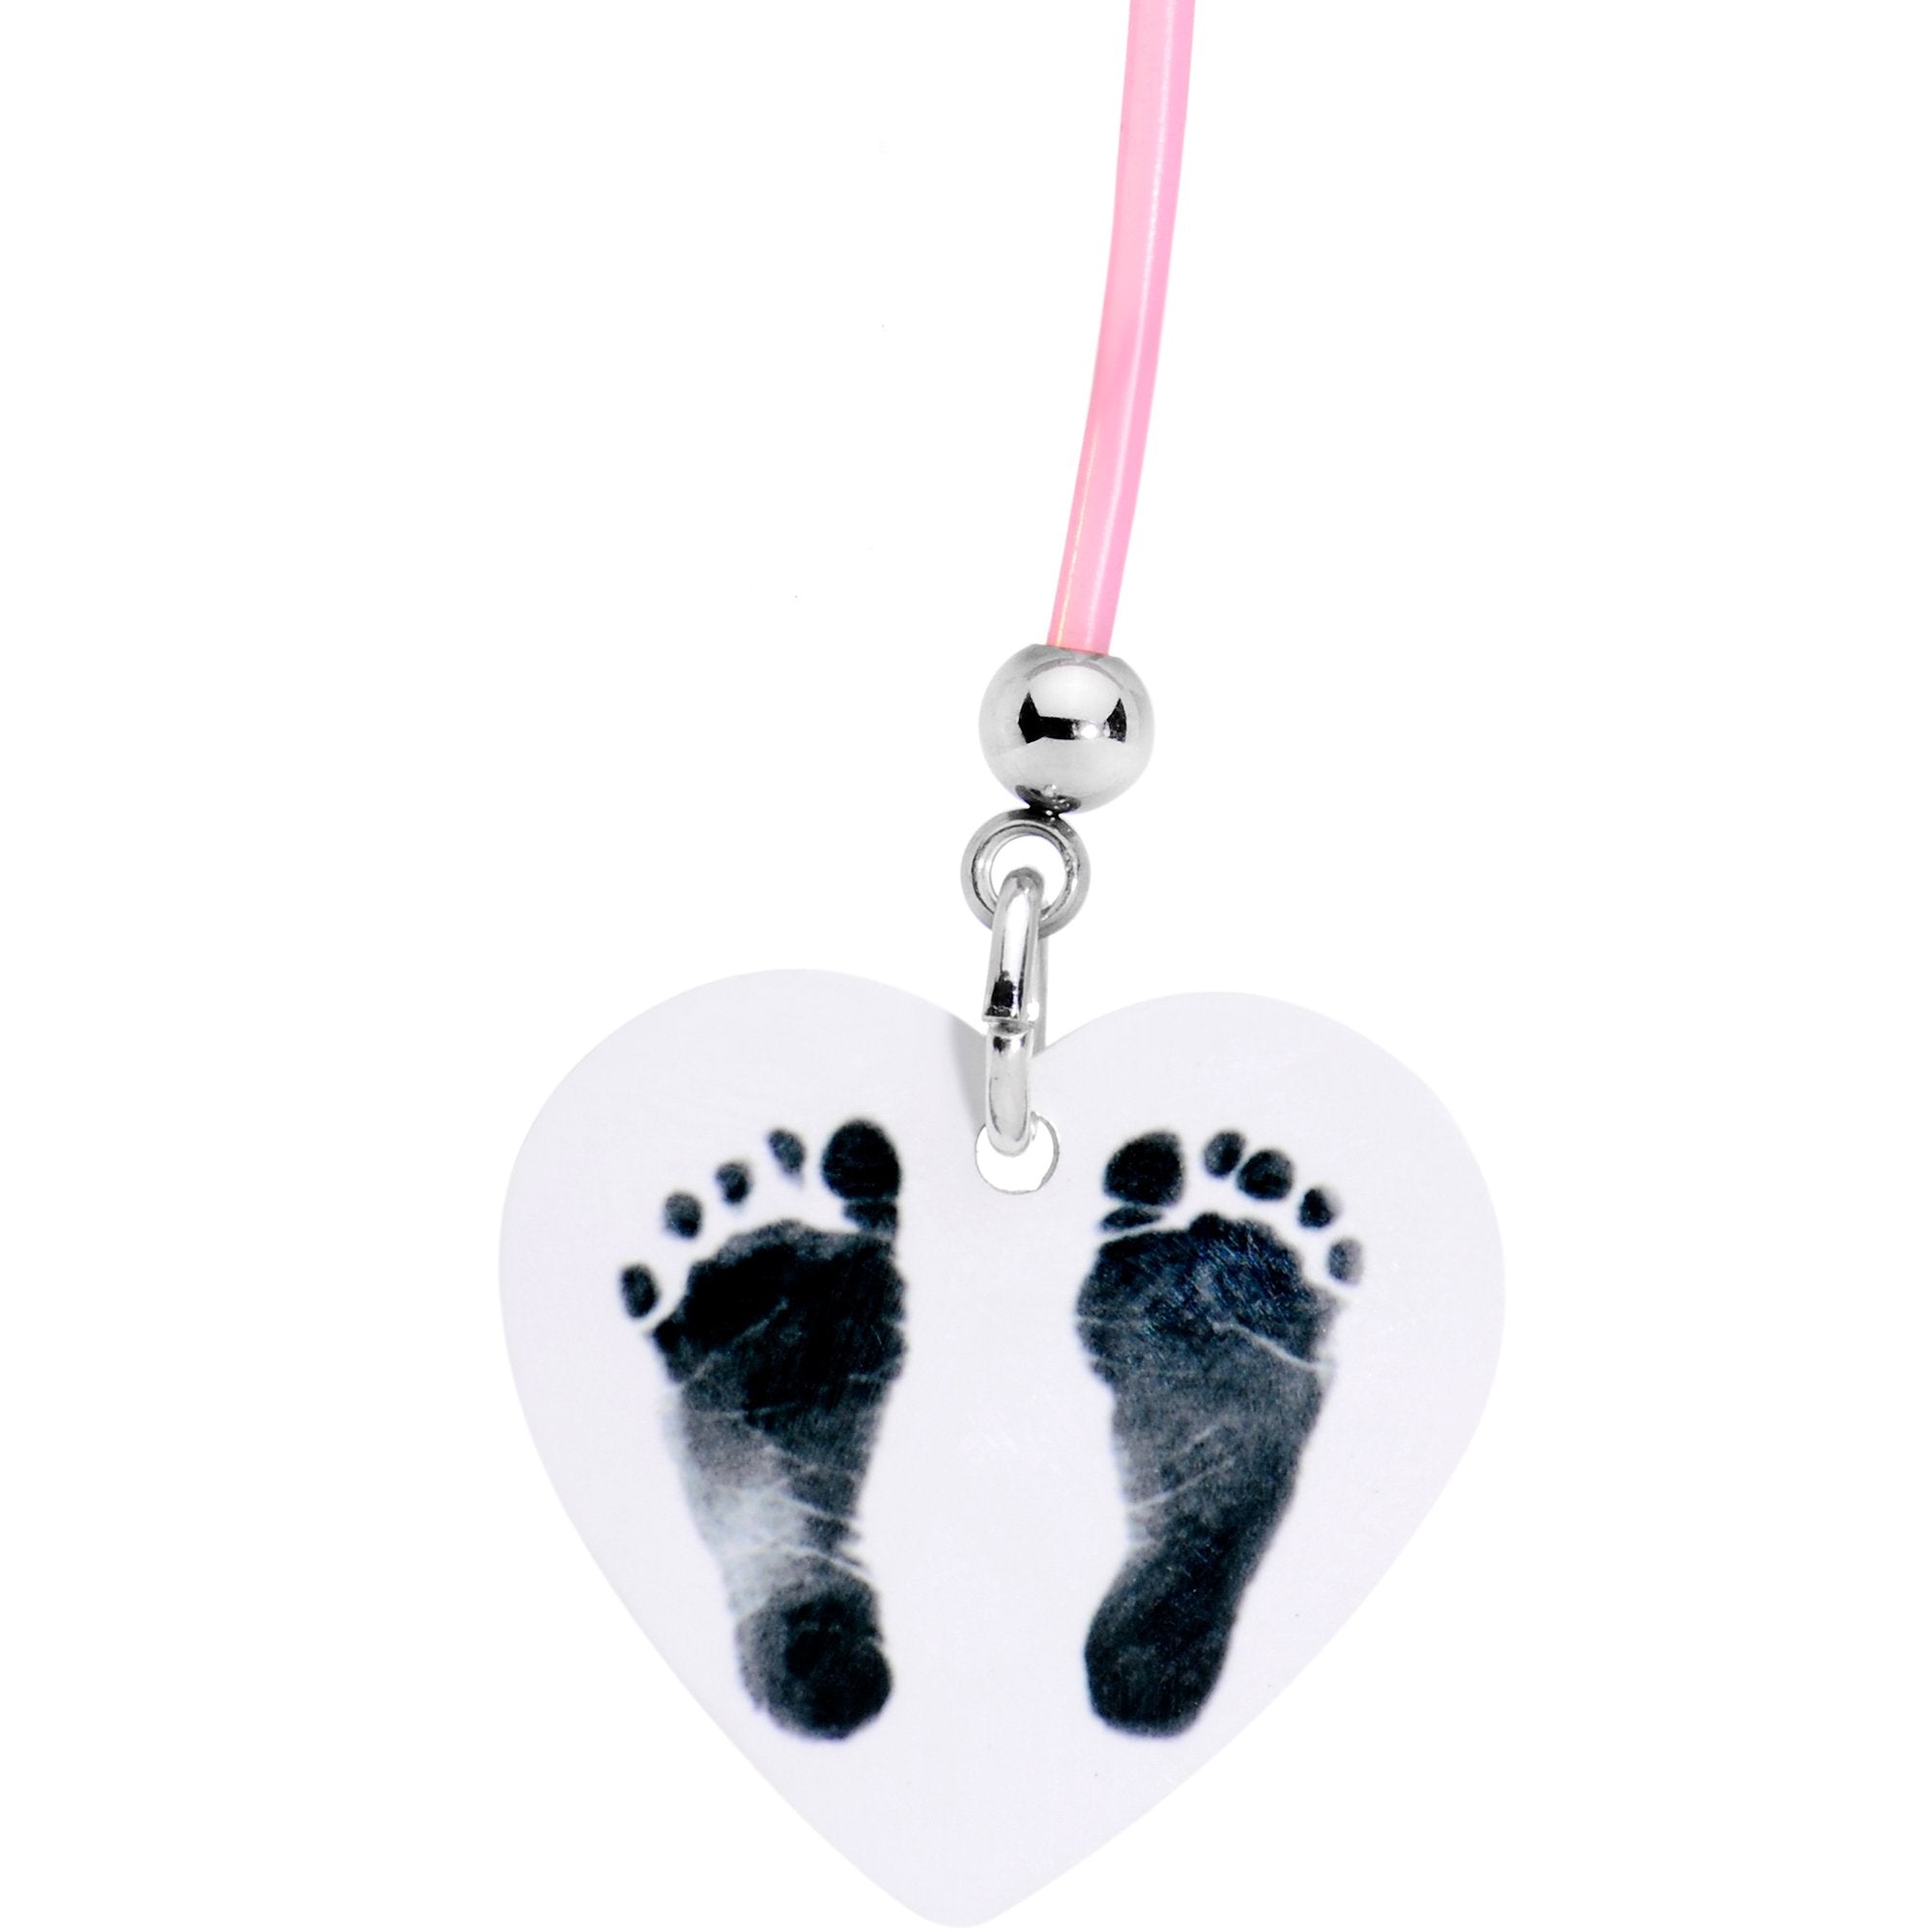 Handcrafted Pink Precious Footprints Dangle Pregnancy Belly Ring